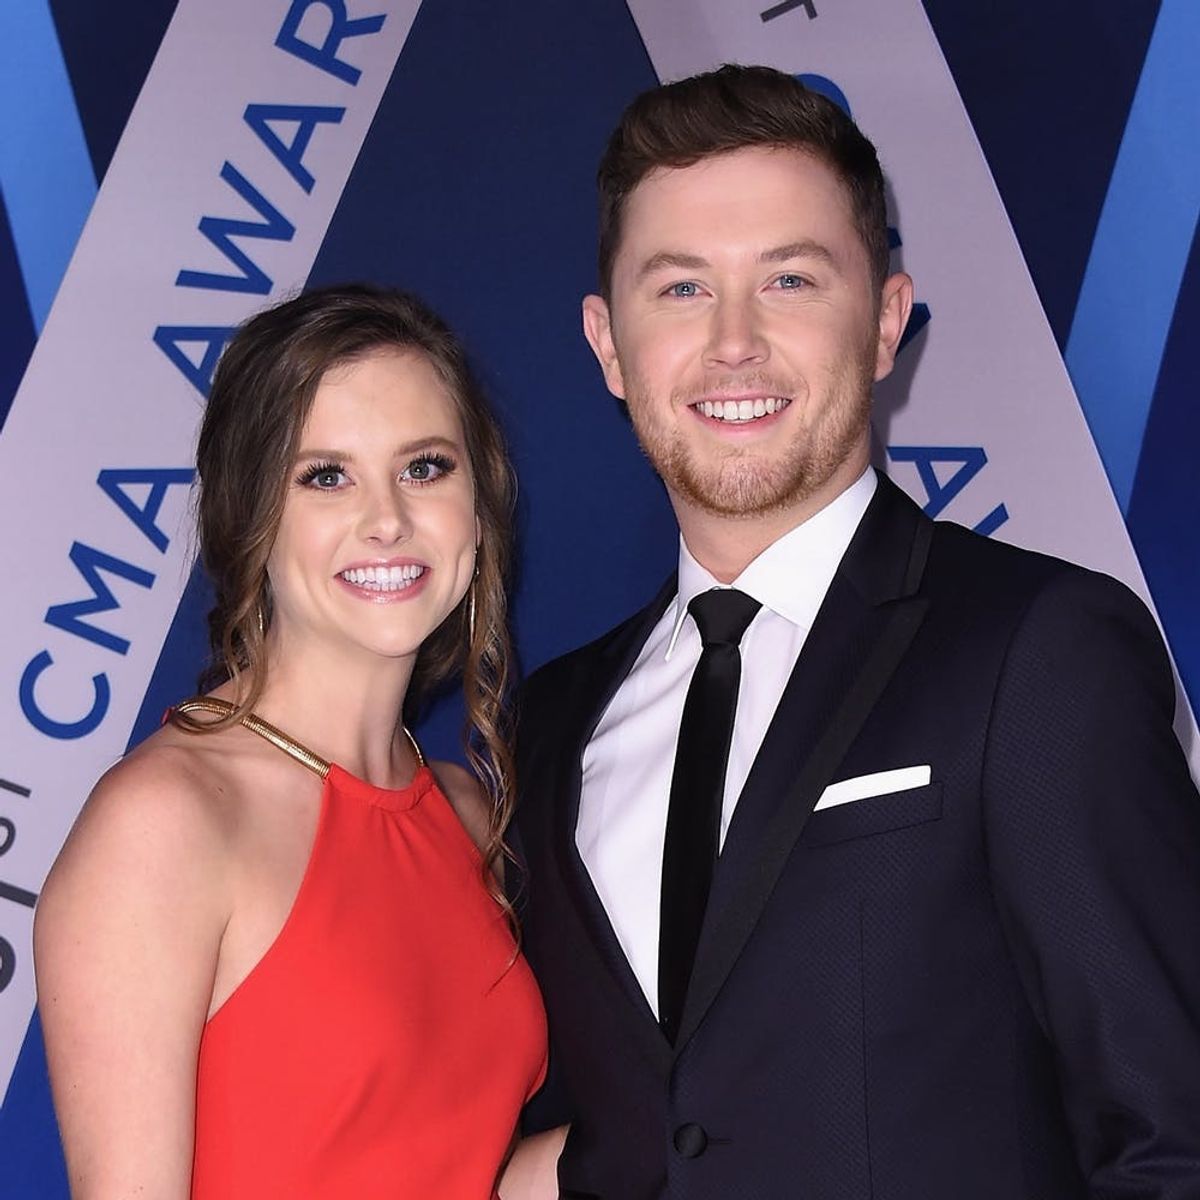 ‘American Idol’ Winner Scotty McCreery Ties the Knot in a Picture-Perfect Mountainside Ceremony